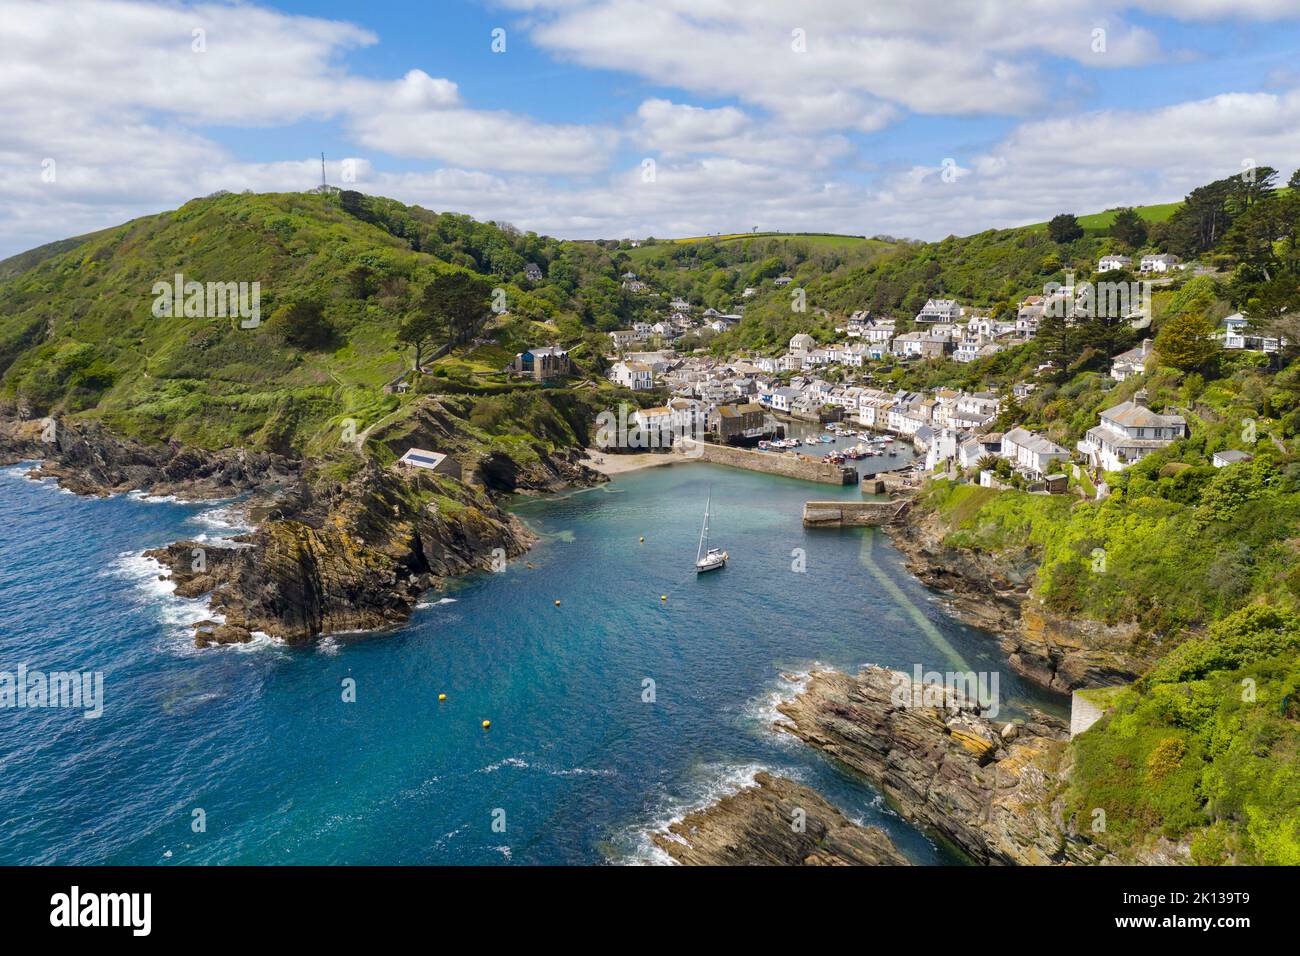 Aerial view of the picturesque Cornish fishing village, Polperro, Cornwall, England, United Kingdom, Europe Stock Photo